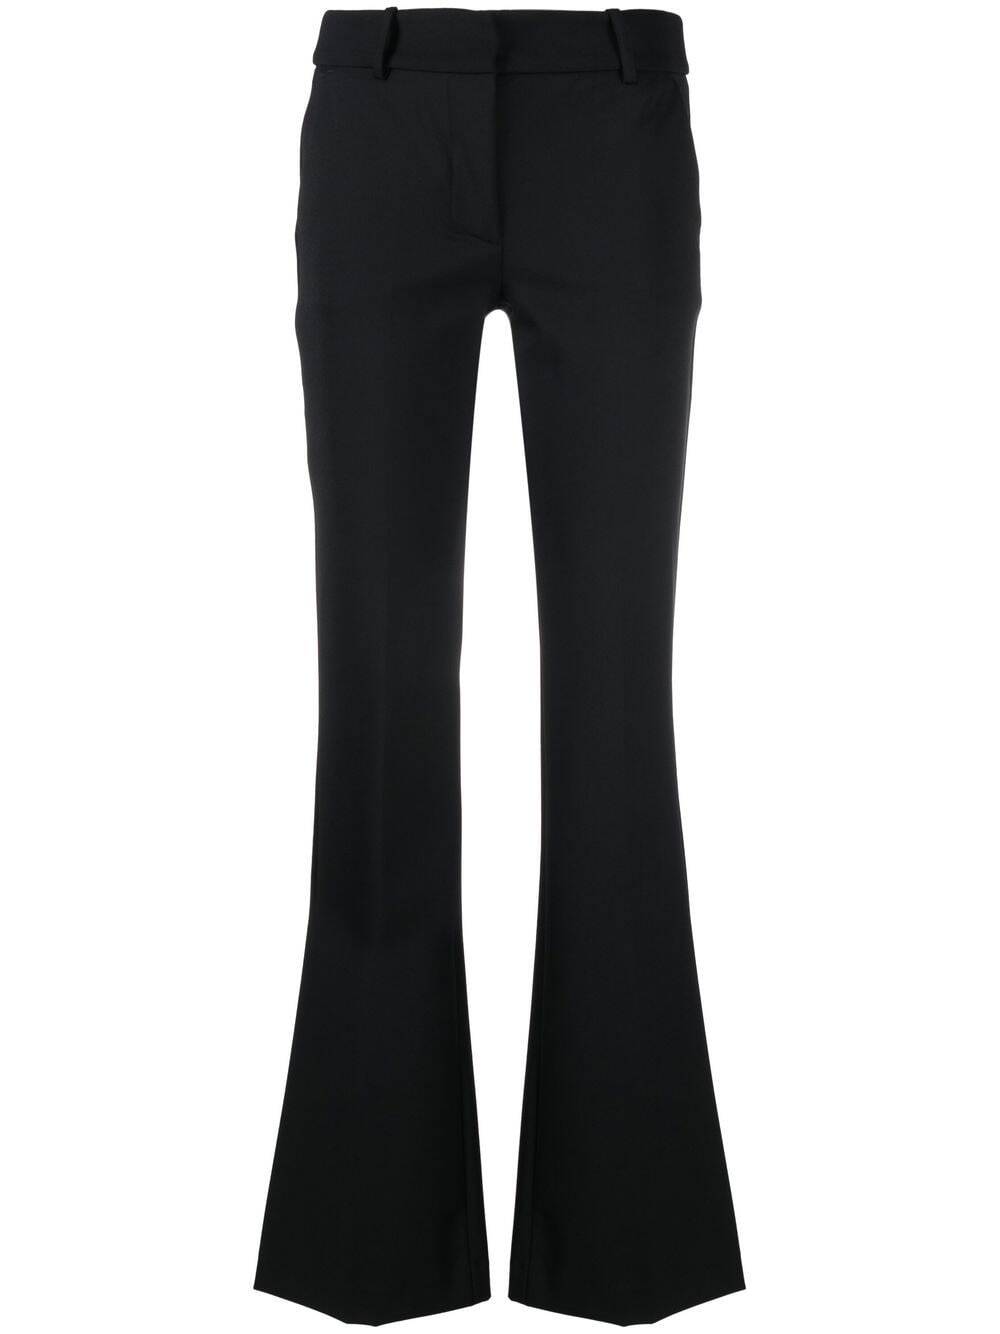 ERMANNO FIRENZE flared tailored trousers - Black